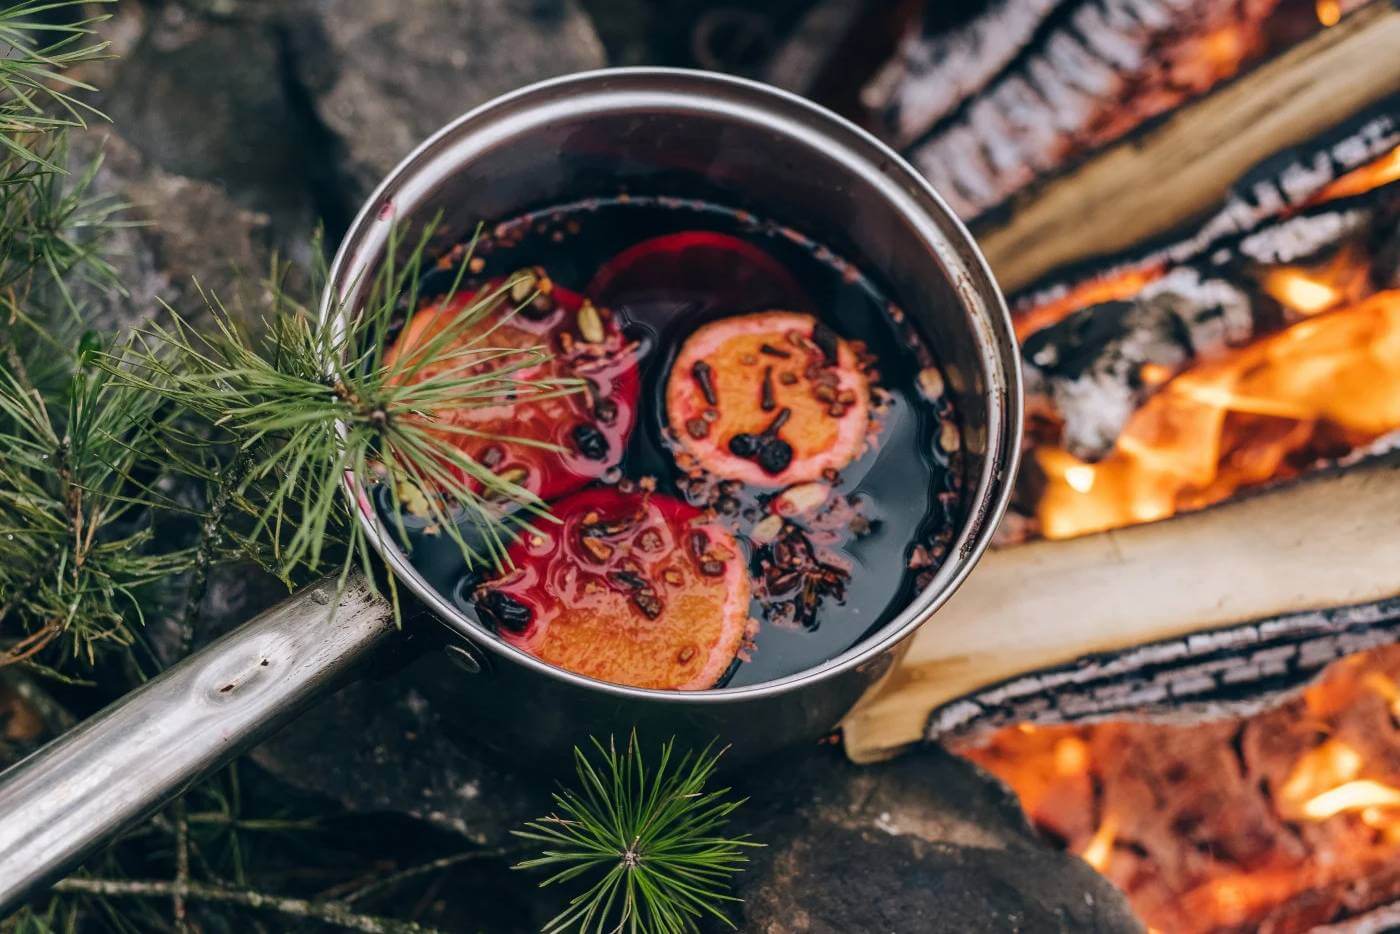 How to Make Mulled Wine - Mulled Wine Recipe Breakdown